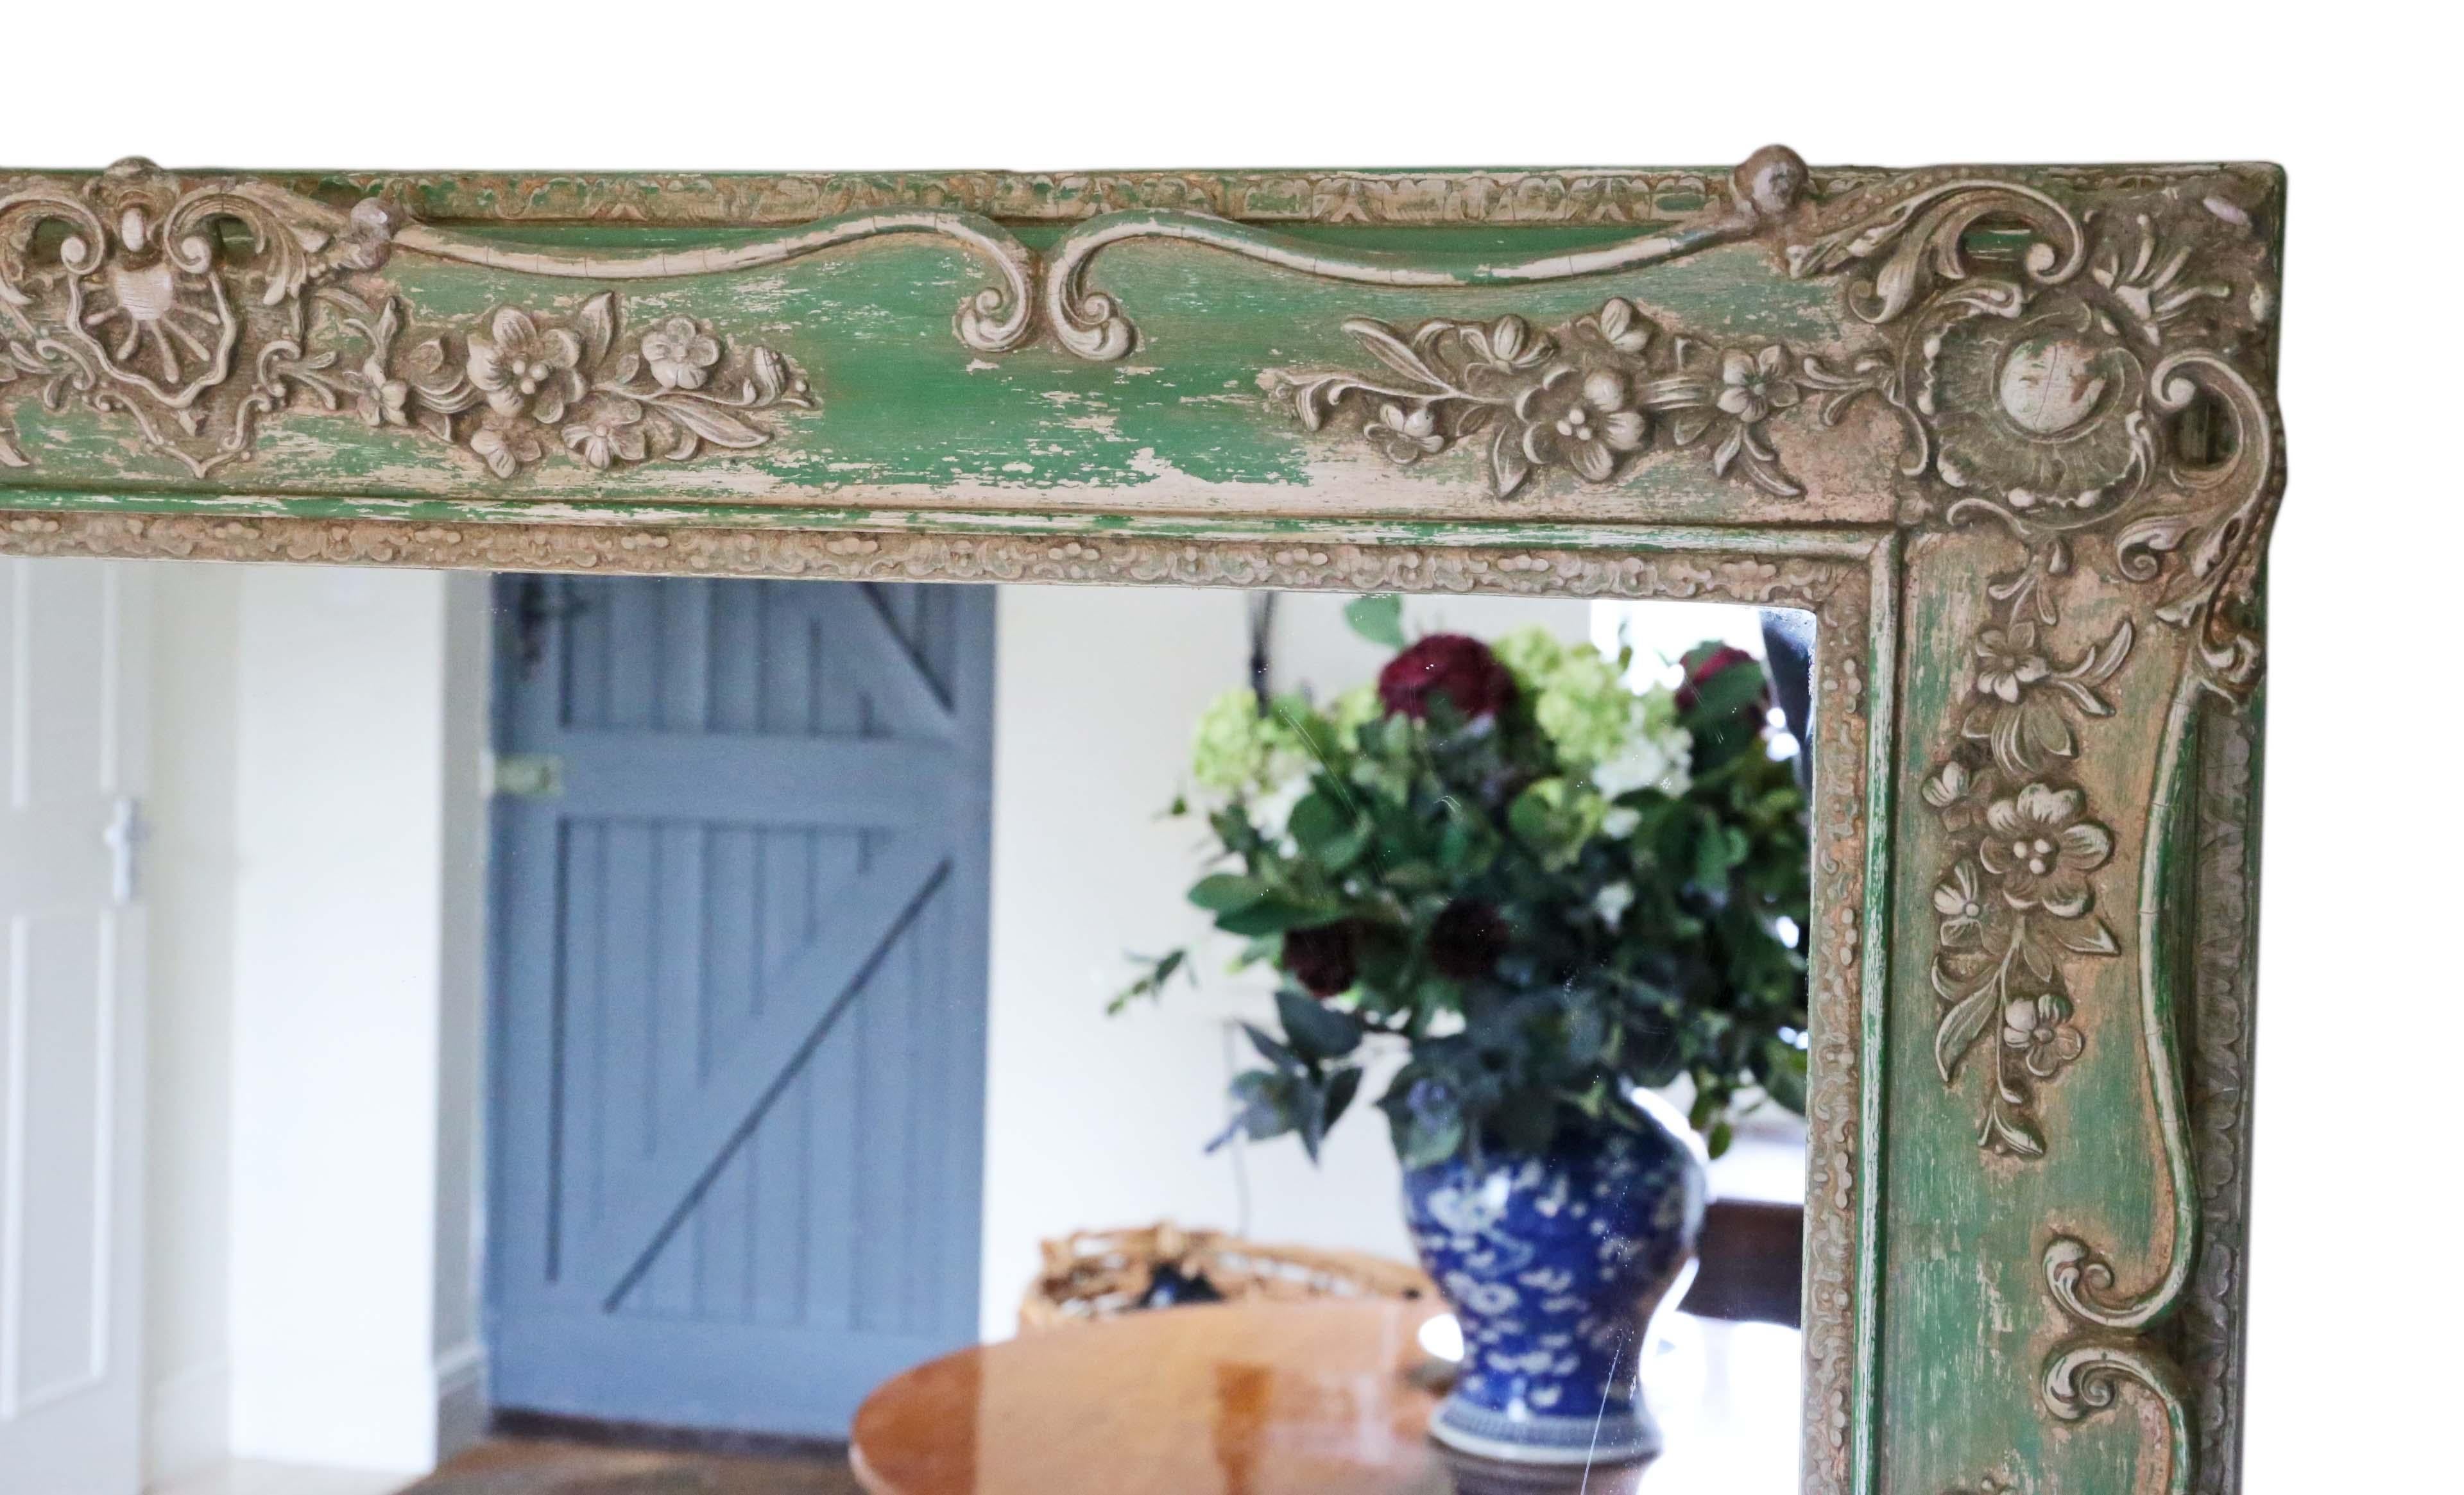 Antique large quality floral 19th Century full height wall floor mirror. Charm and elegance.
This is a lovely mirror. Great frame in good condition… looks great.
An impressive and rare find, that would look amazing in the right location.
The